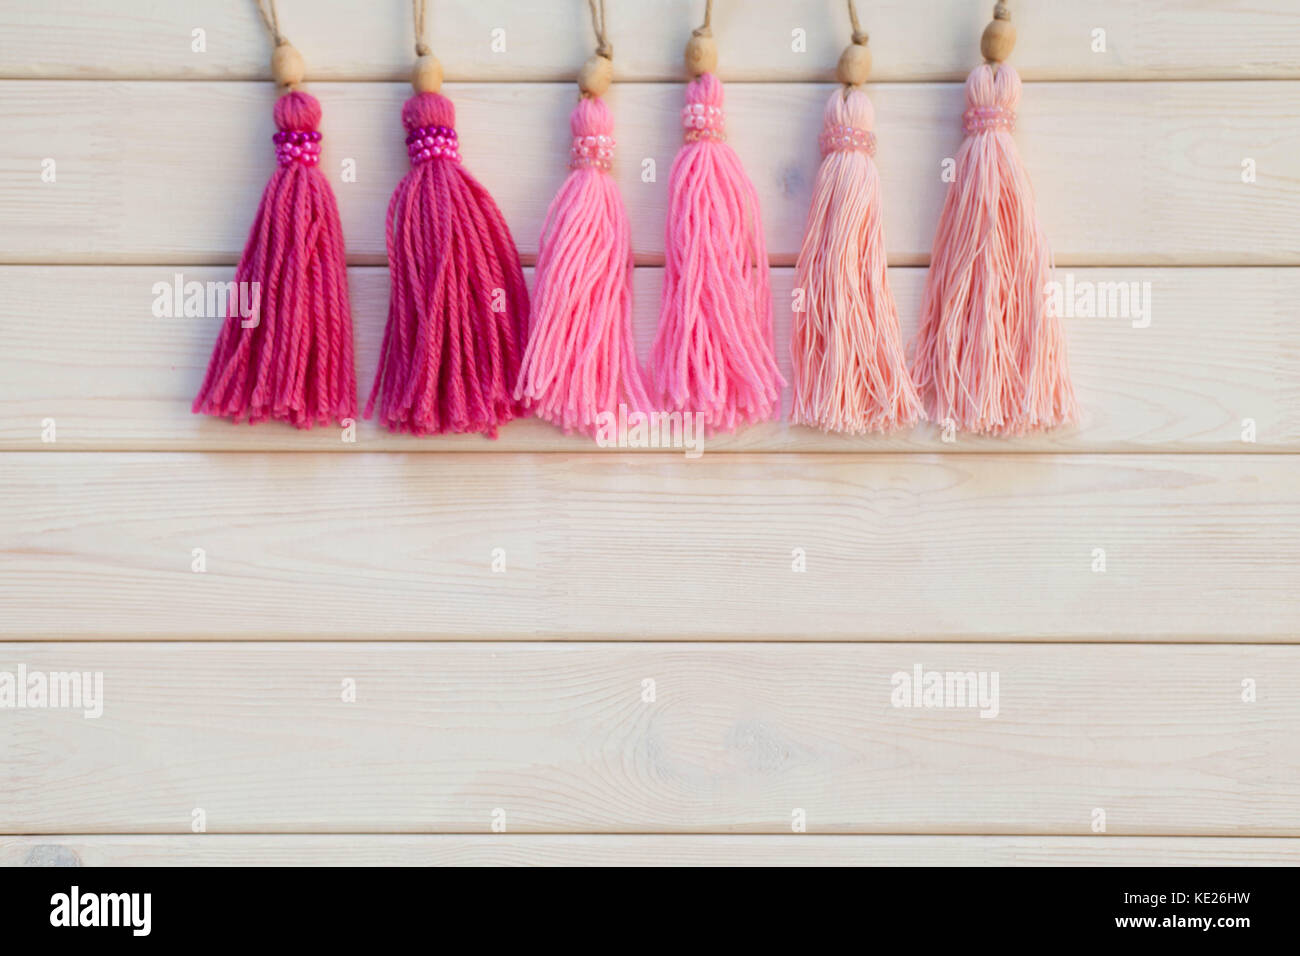 Pink tassels. Background of white wood. Stock Photo